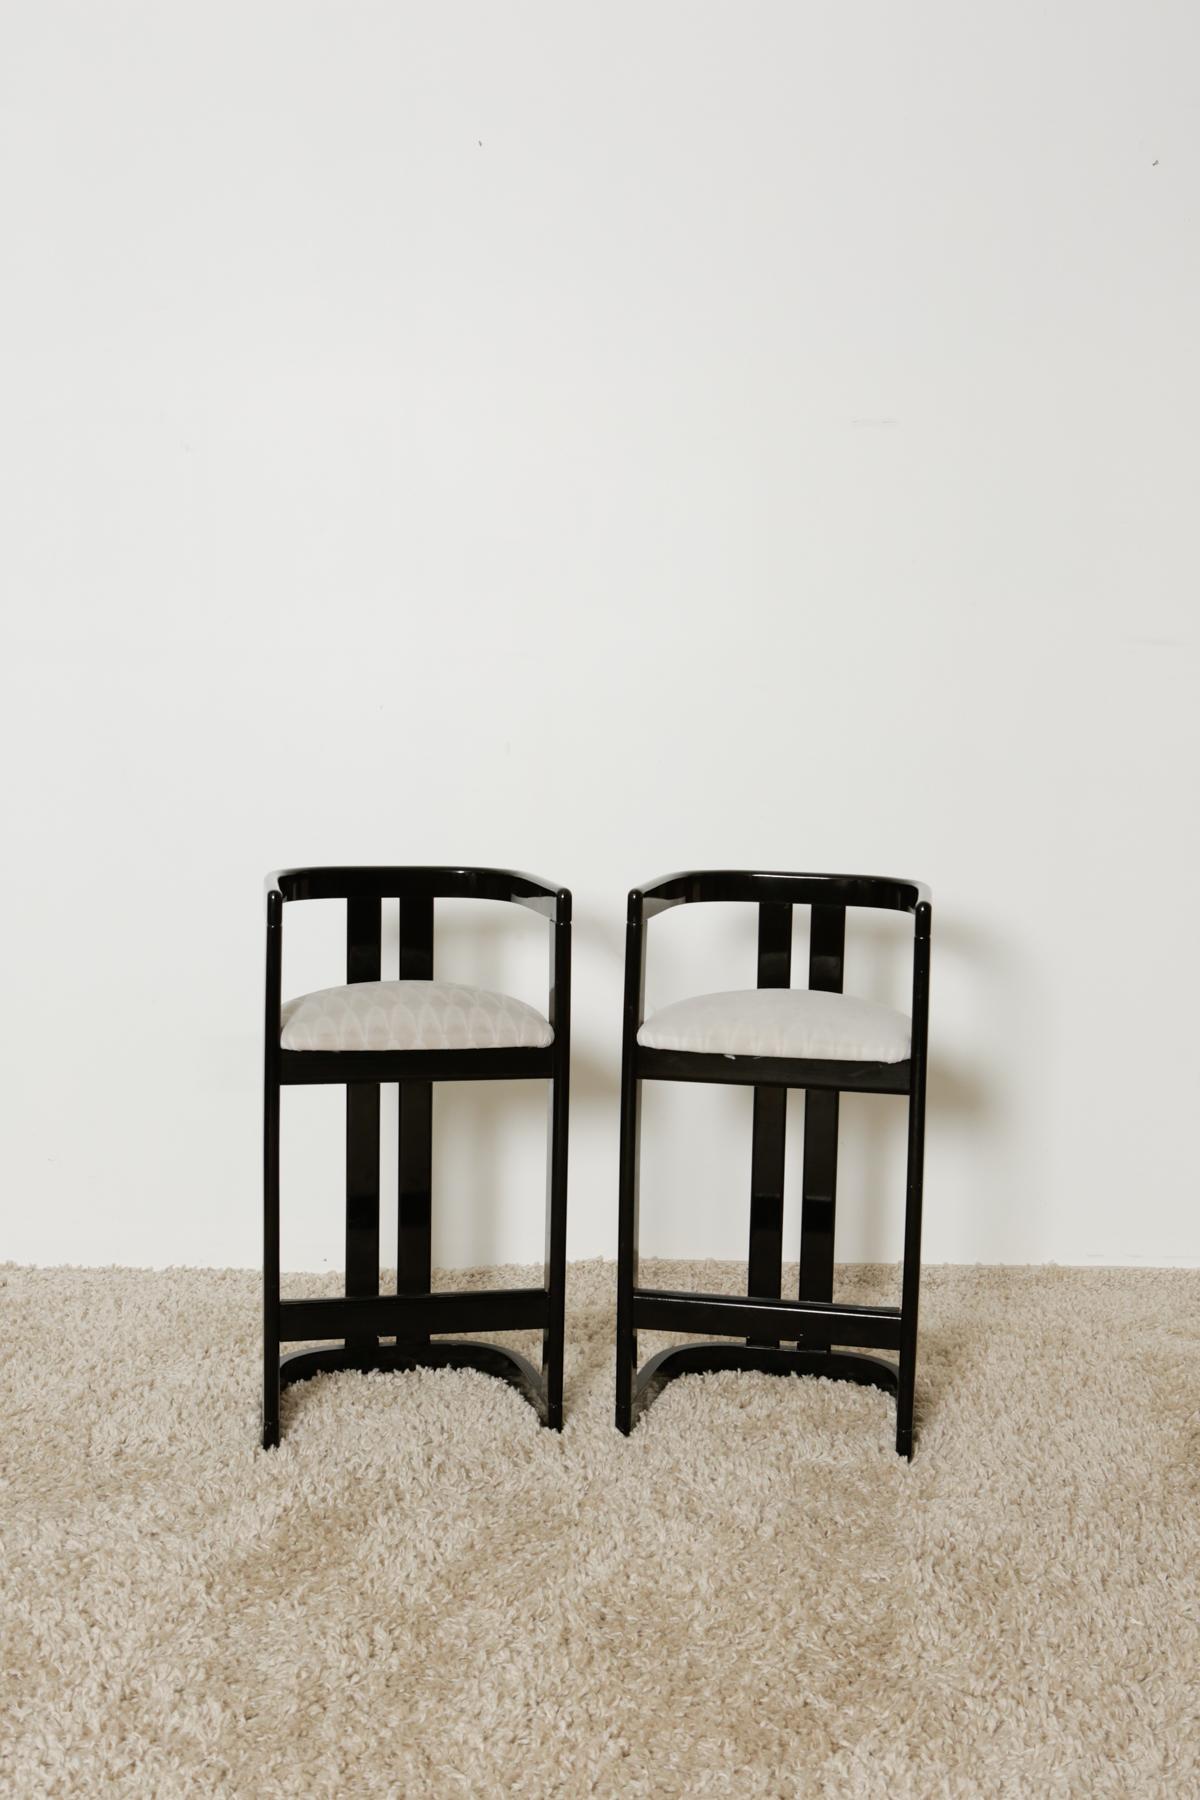 Karl Springer “Onassis” Style 1980s Black Lacquer Bar Stools as a Set 4